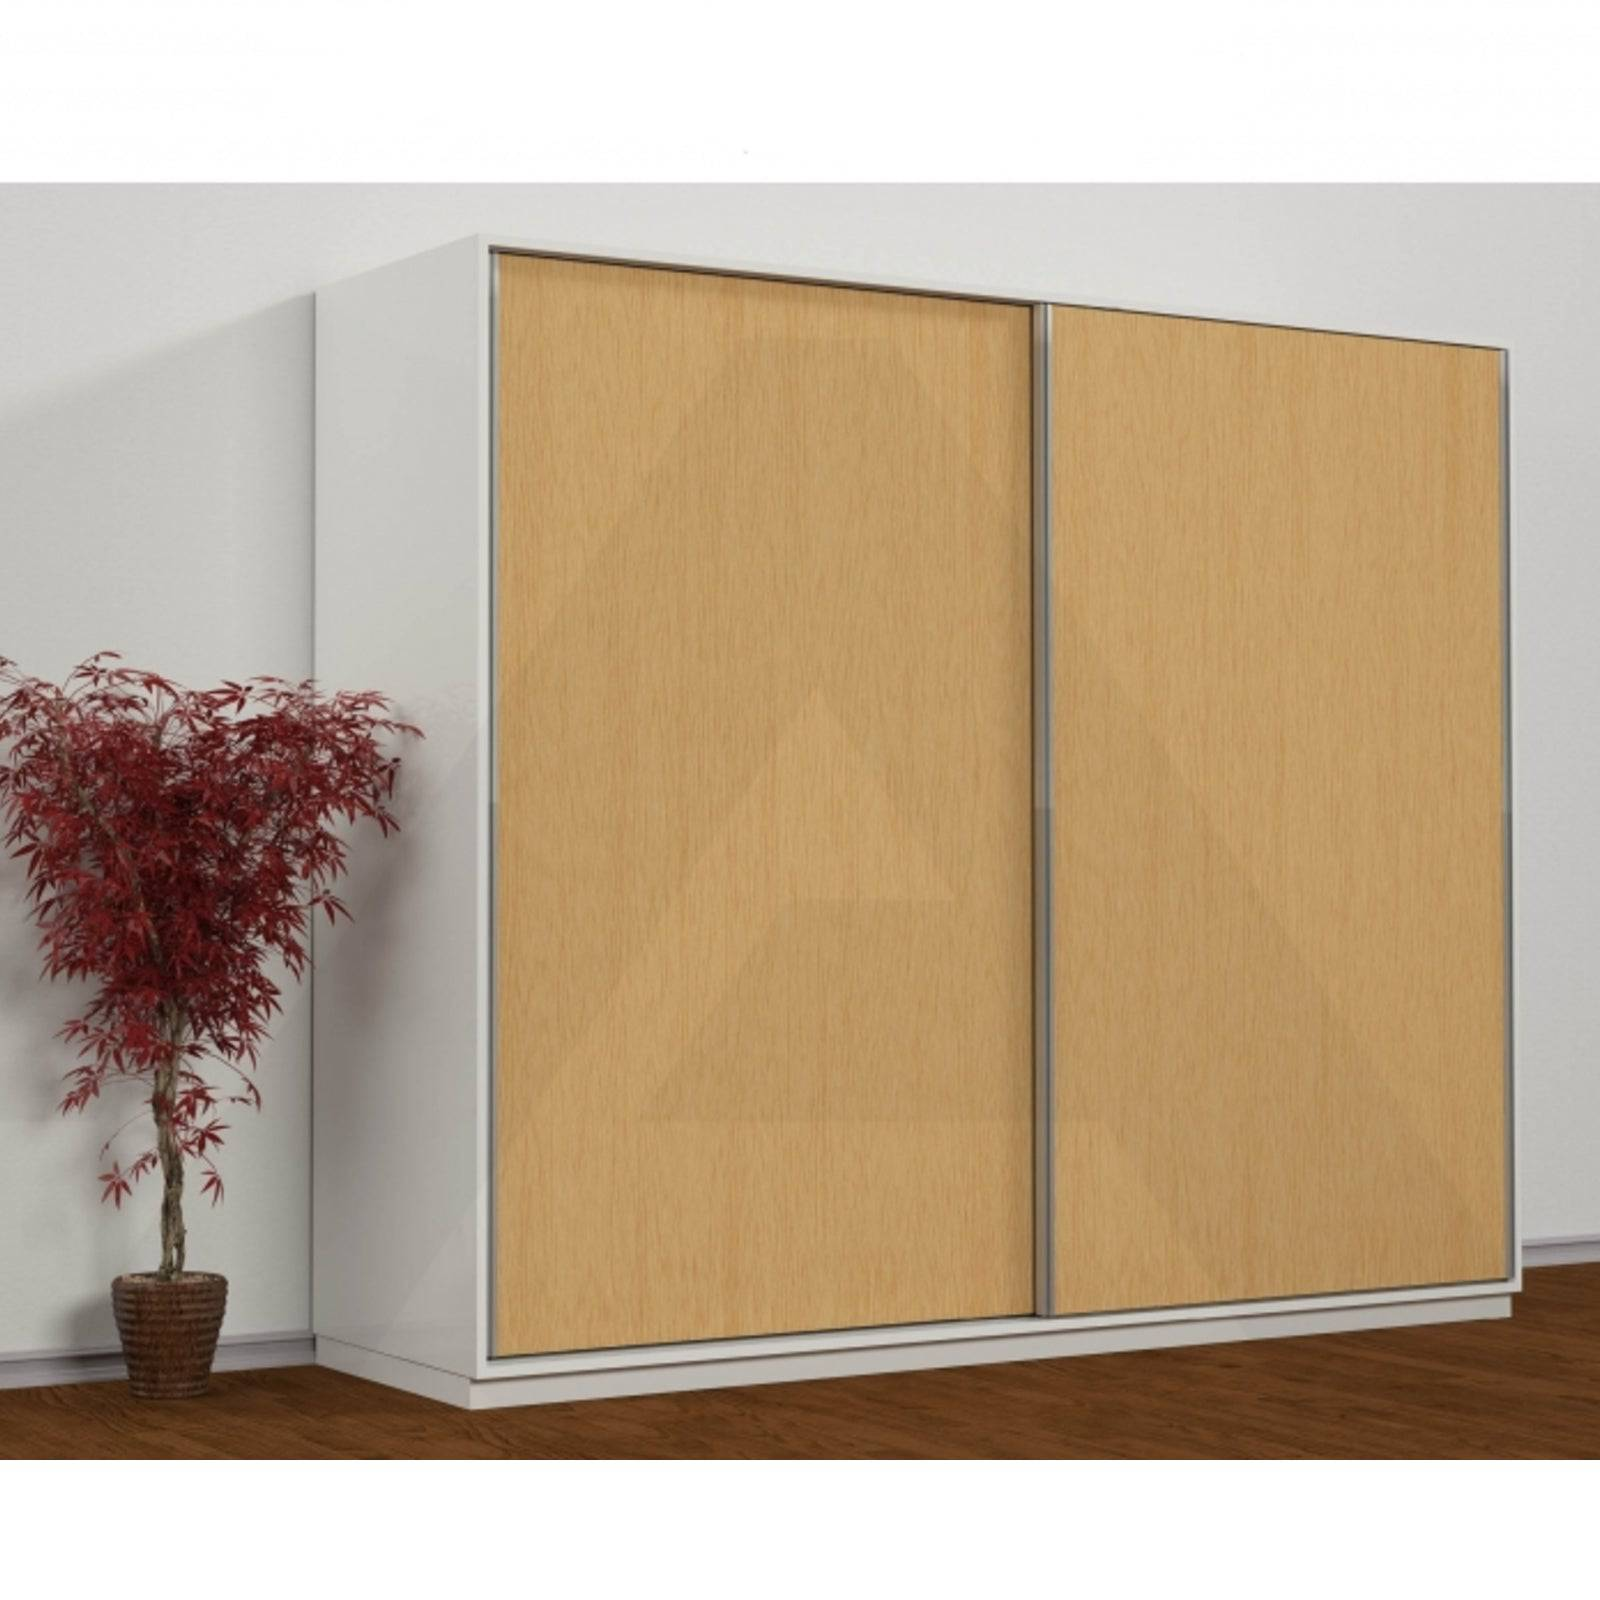 A sliding wardrobe door kit with a huge range of doors, styles and colours